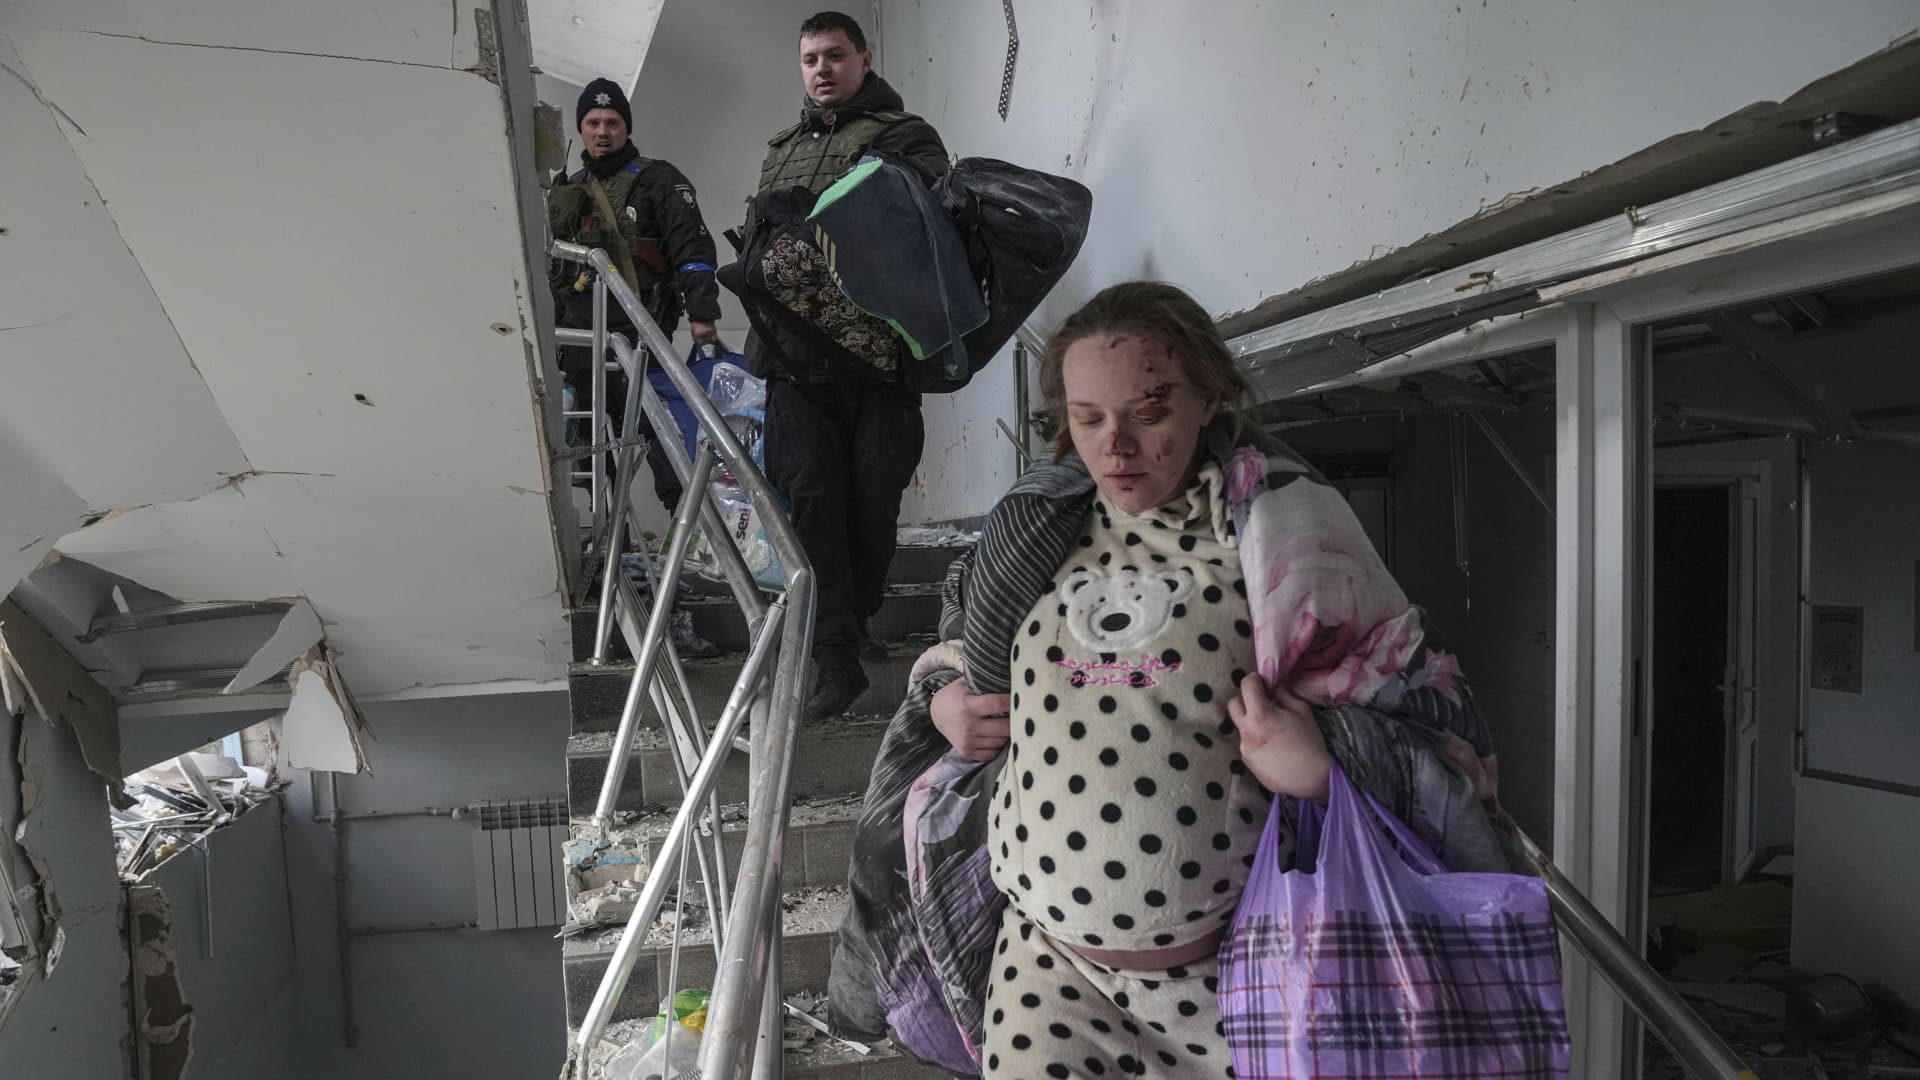 An injured pregnant woman walks downstairs in a maternity hospital damaged by shelling in Mariupol, Ukraine, Wednesday, March 9, 2022.